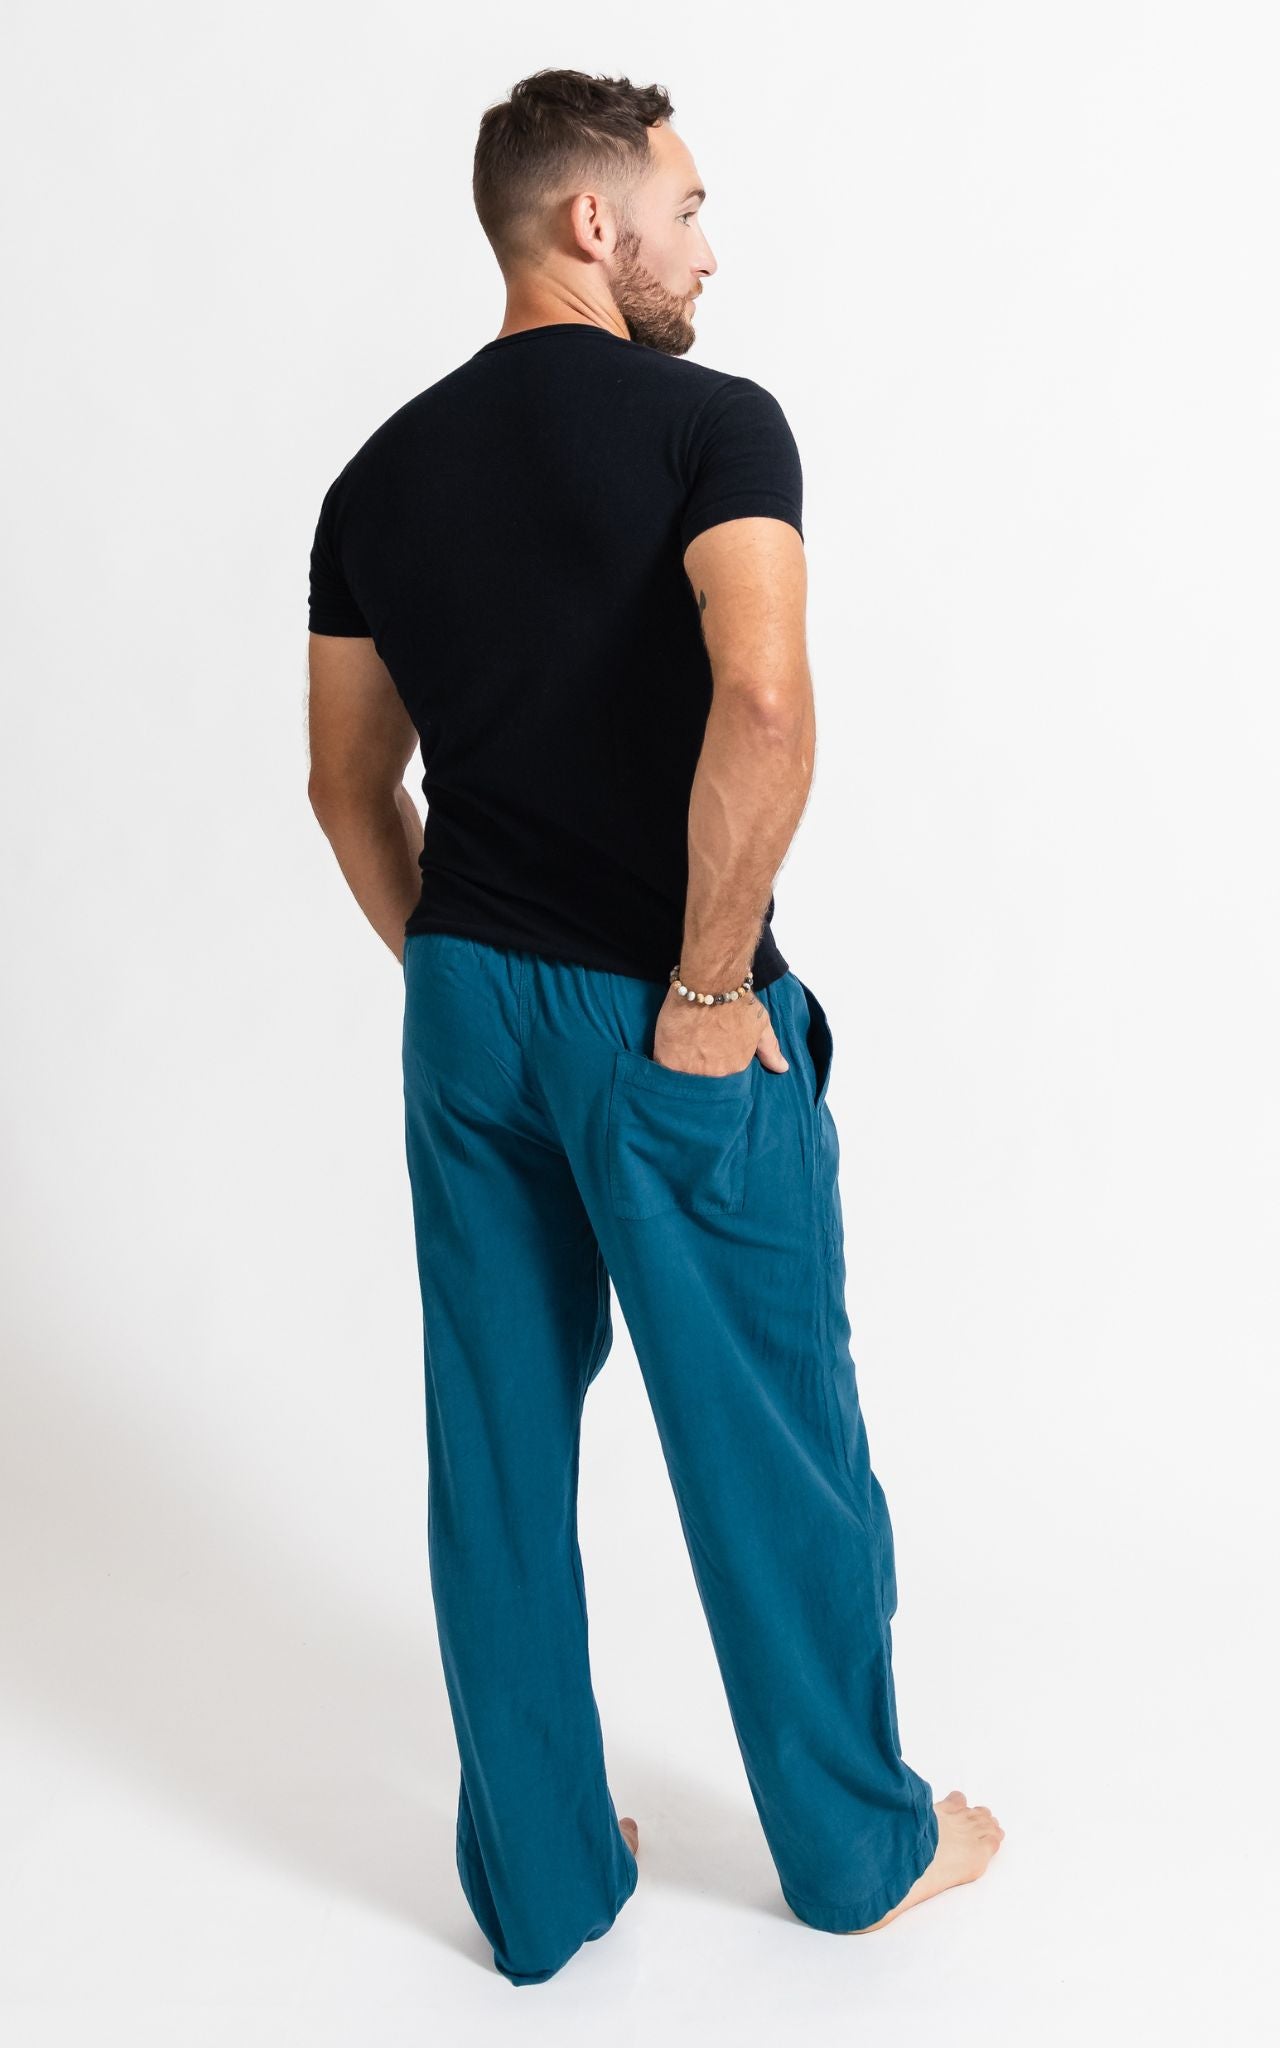 Turquoise Warm Woolen Trouser Or Pant - Handicrafts In Nepal